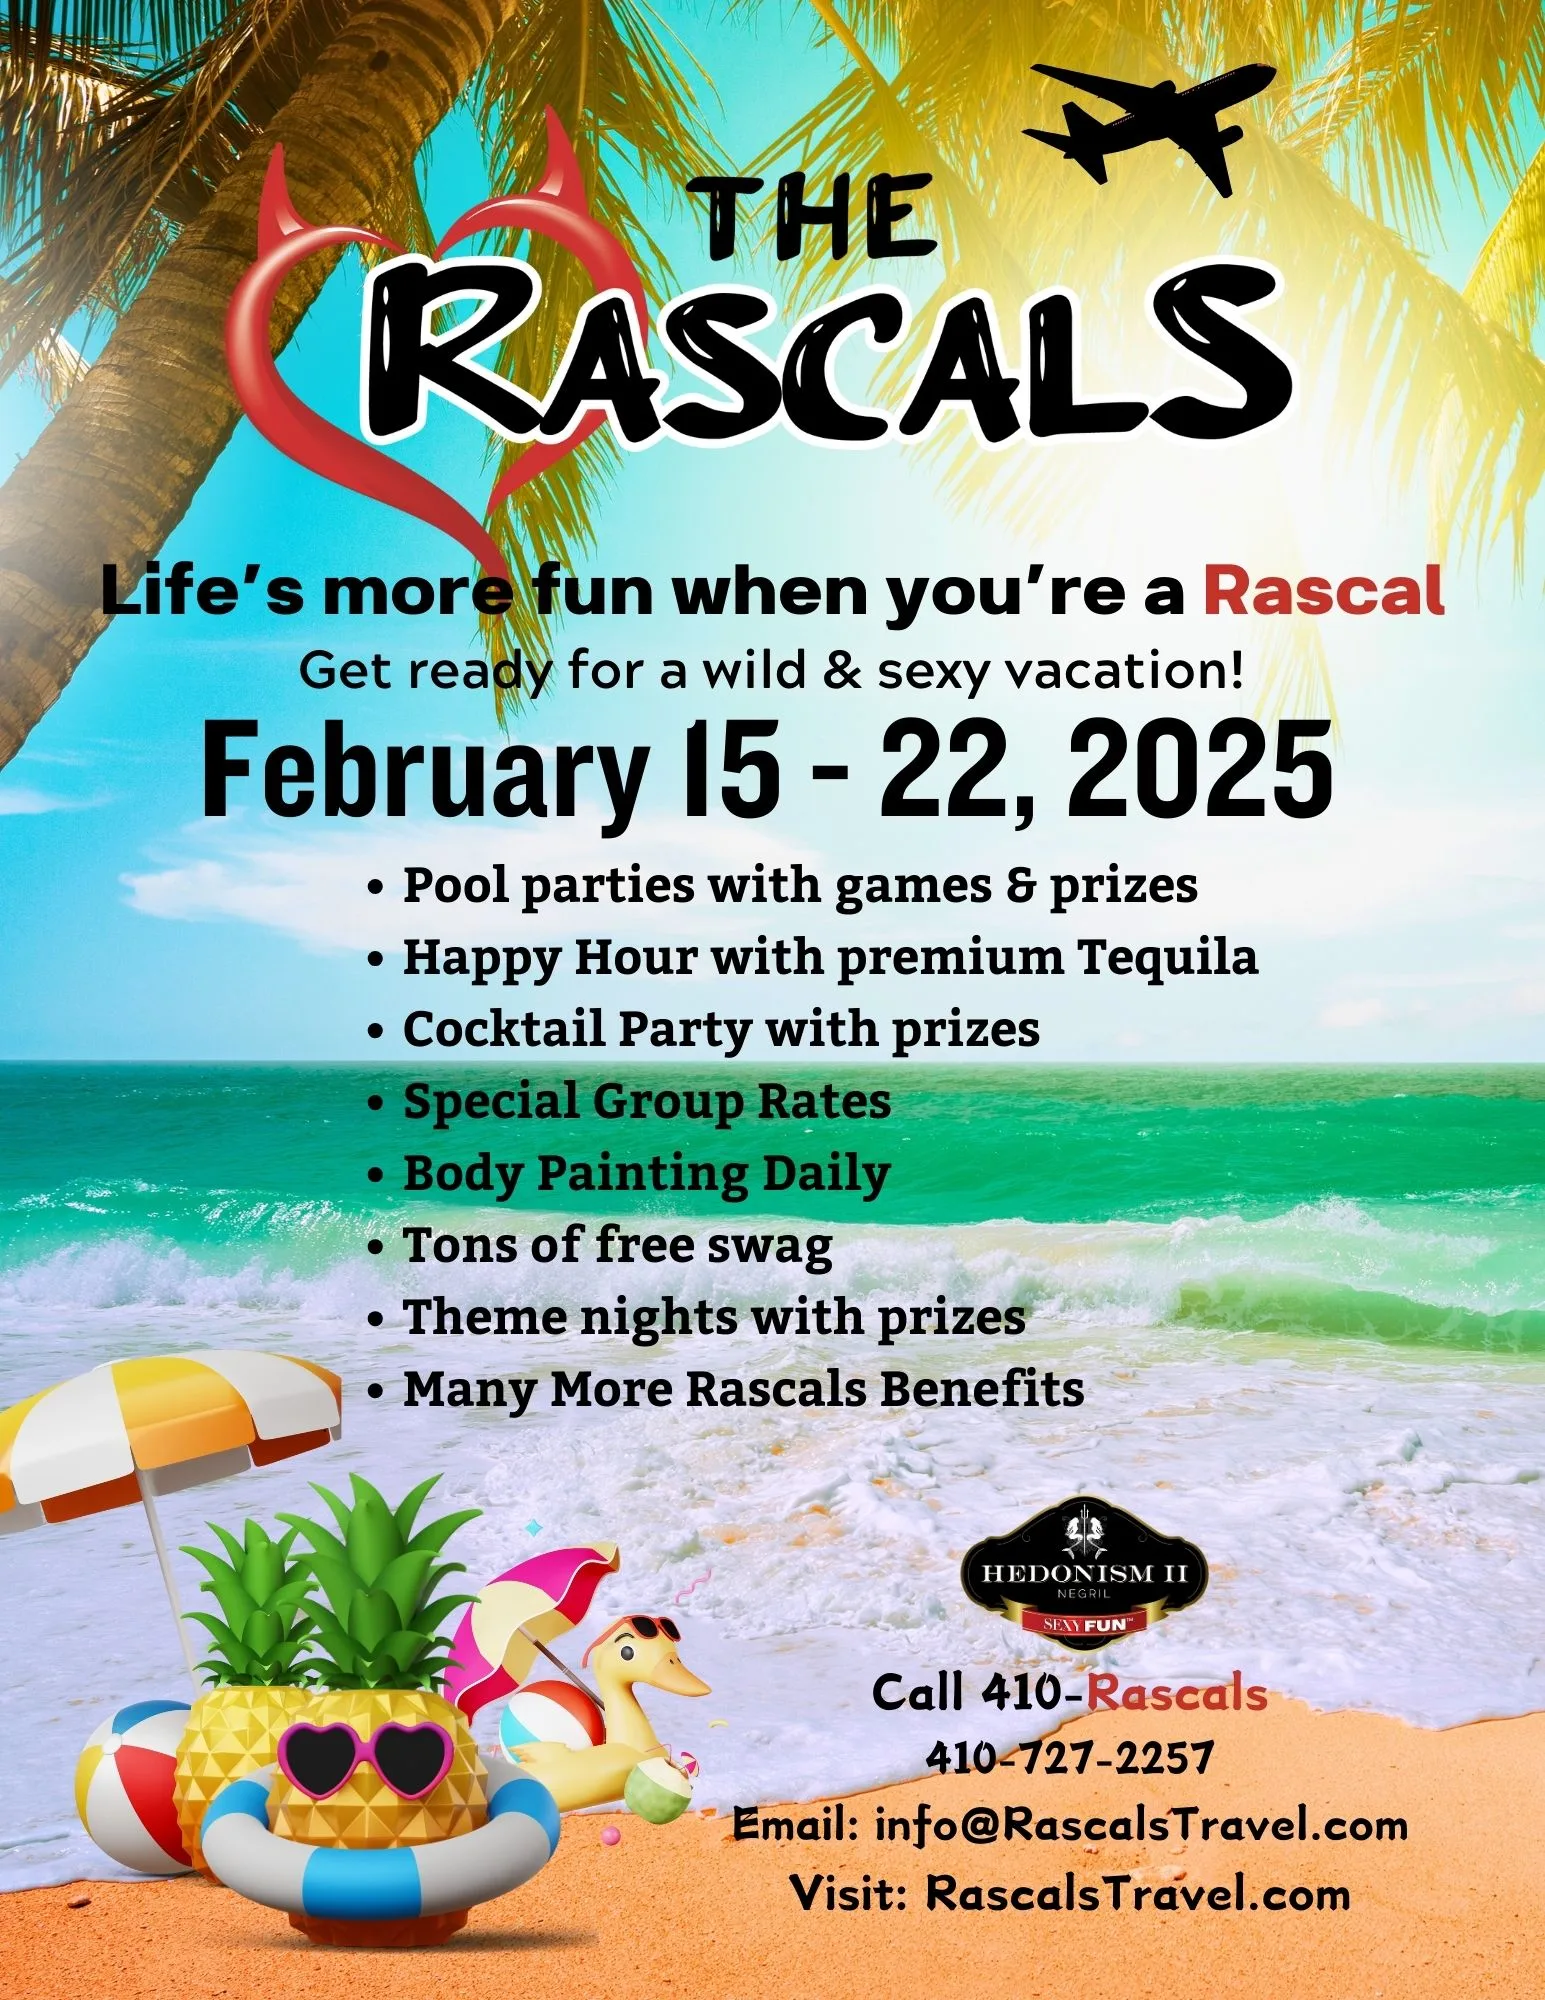 Hedonism Group Event - The Rascals 2025